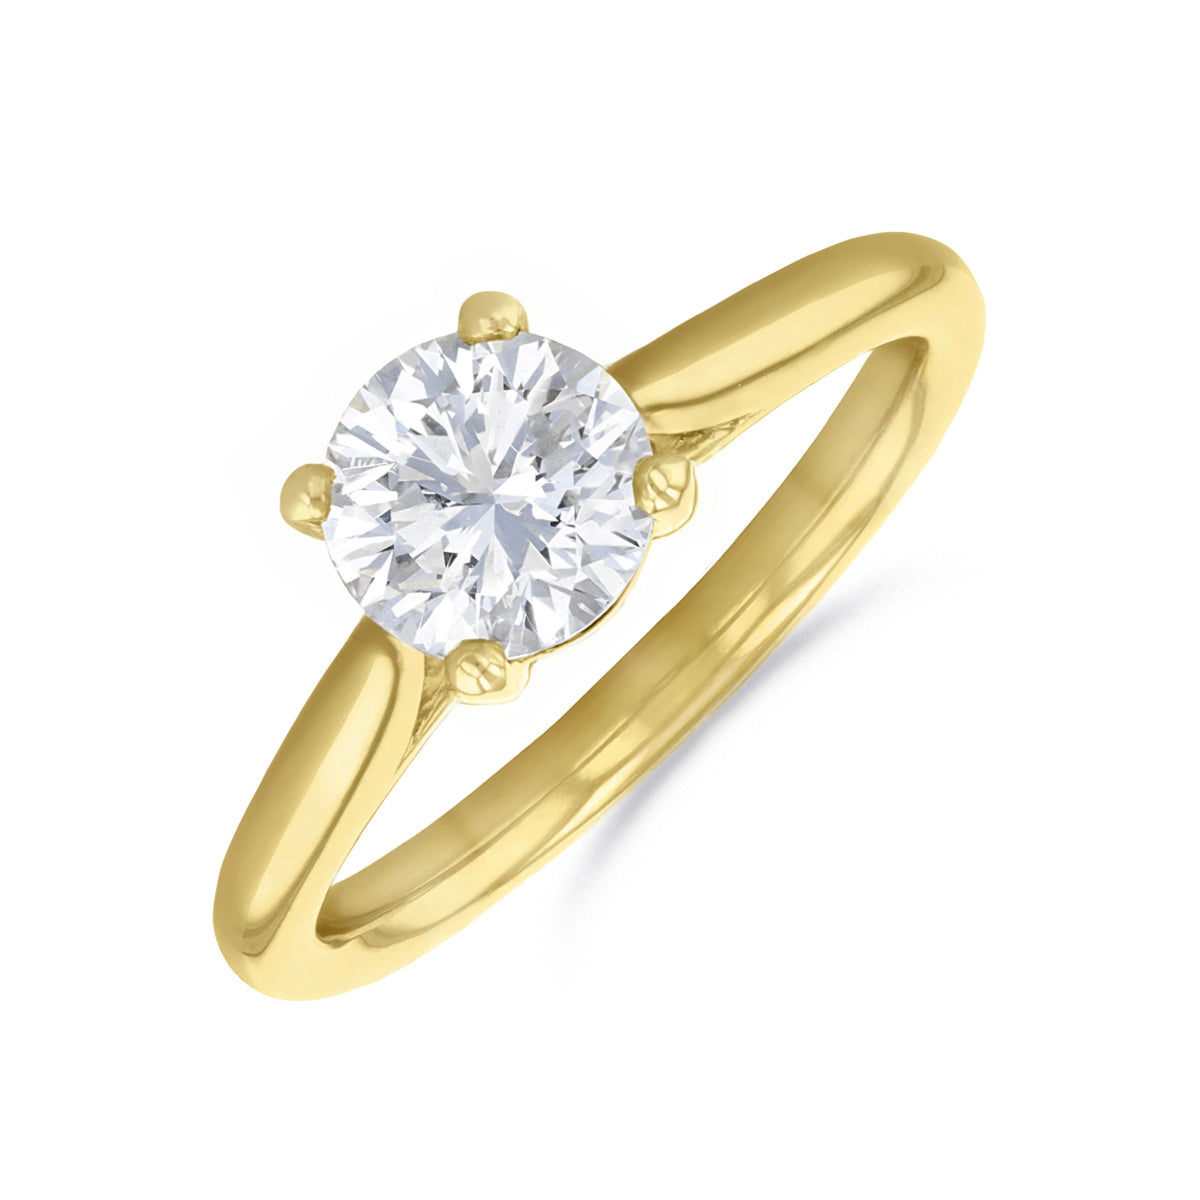 1.00ct Ophelia Round Brilliant Cut Diamond Solitaire Engagement Ring | 18ct Yellow Gold